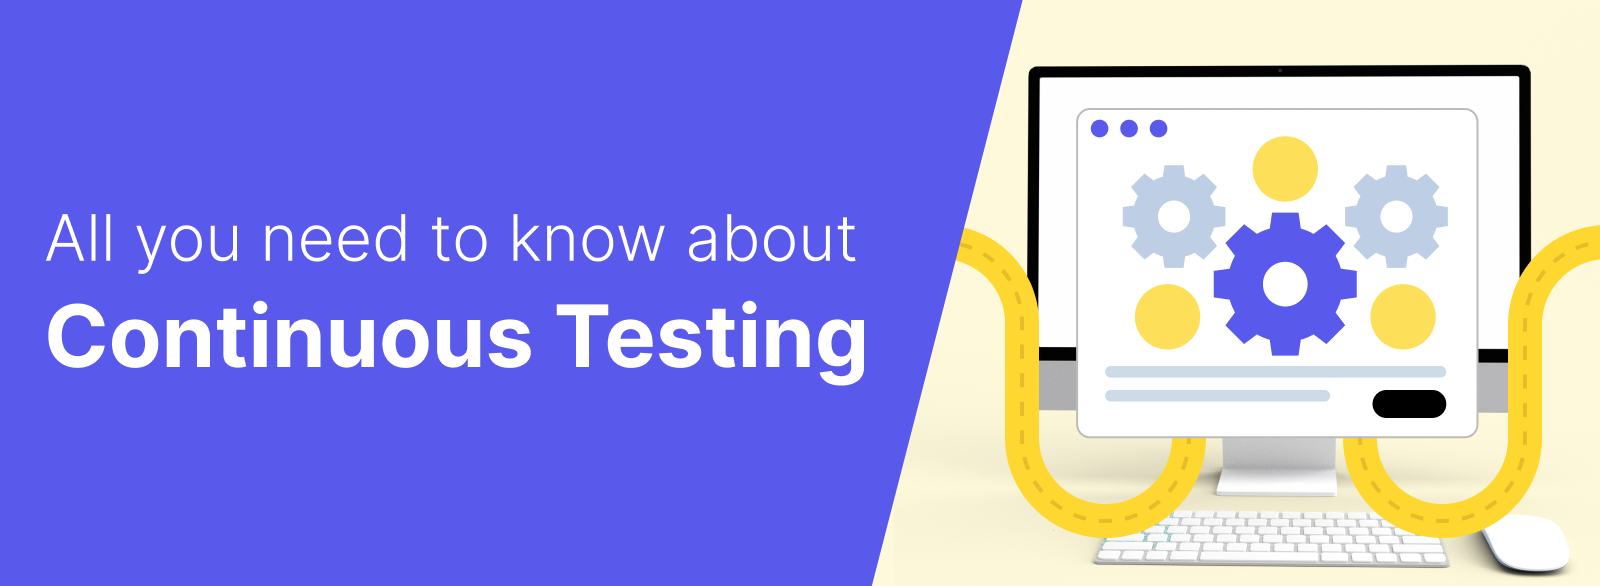 Continuous testing: All you need to know about